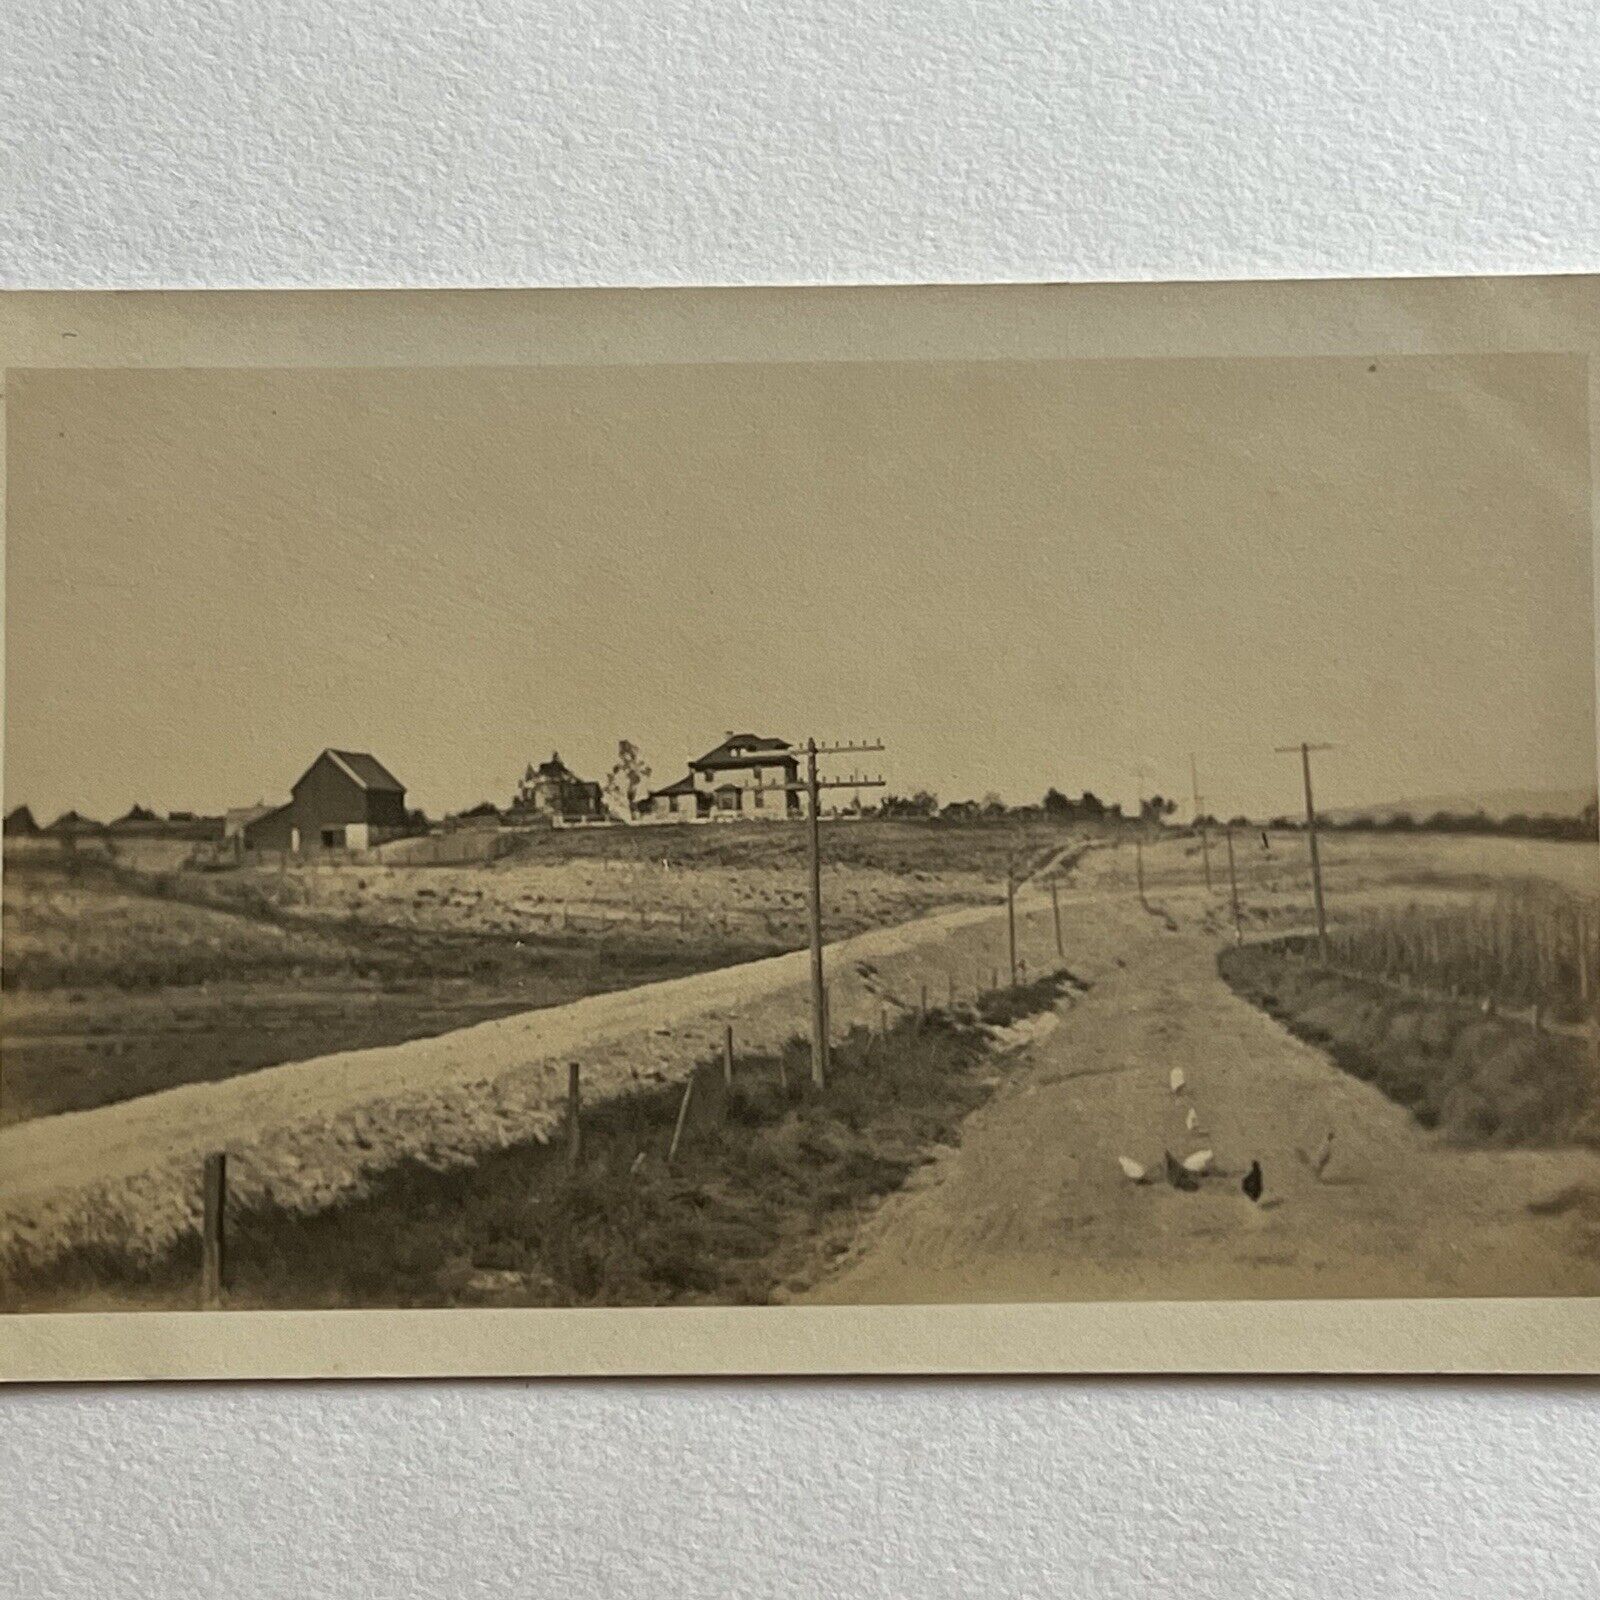 Antique RPPC Real Postcard Chickens On Dirt Road Farm Life House Barn Everyday